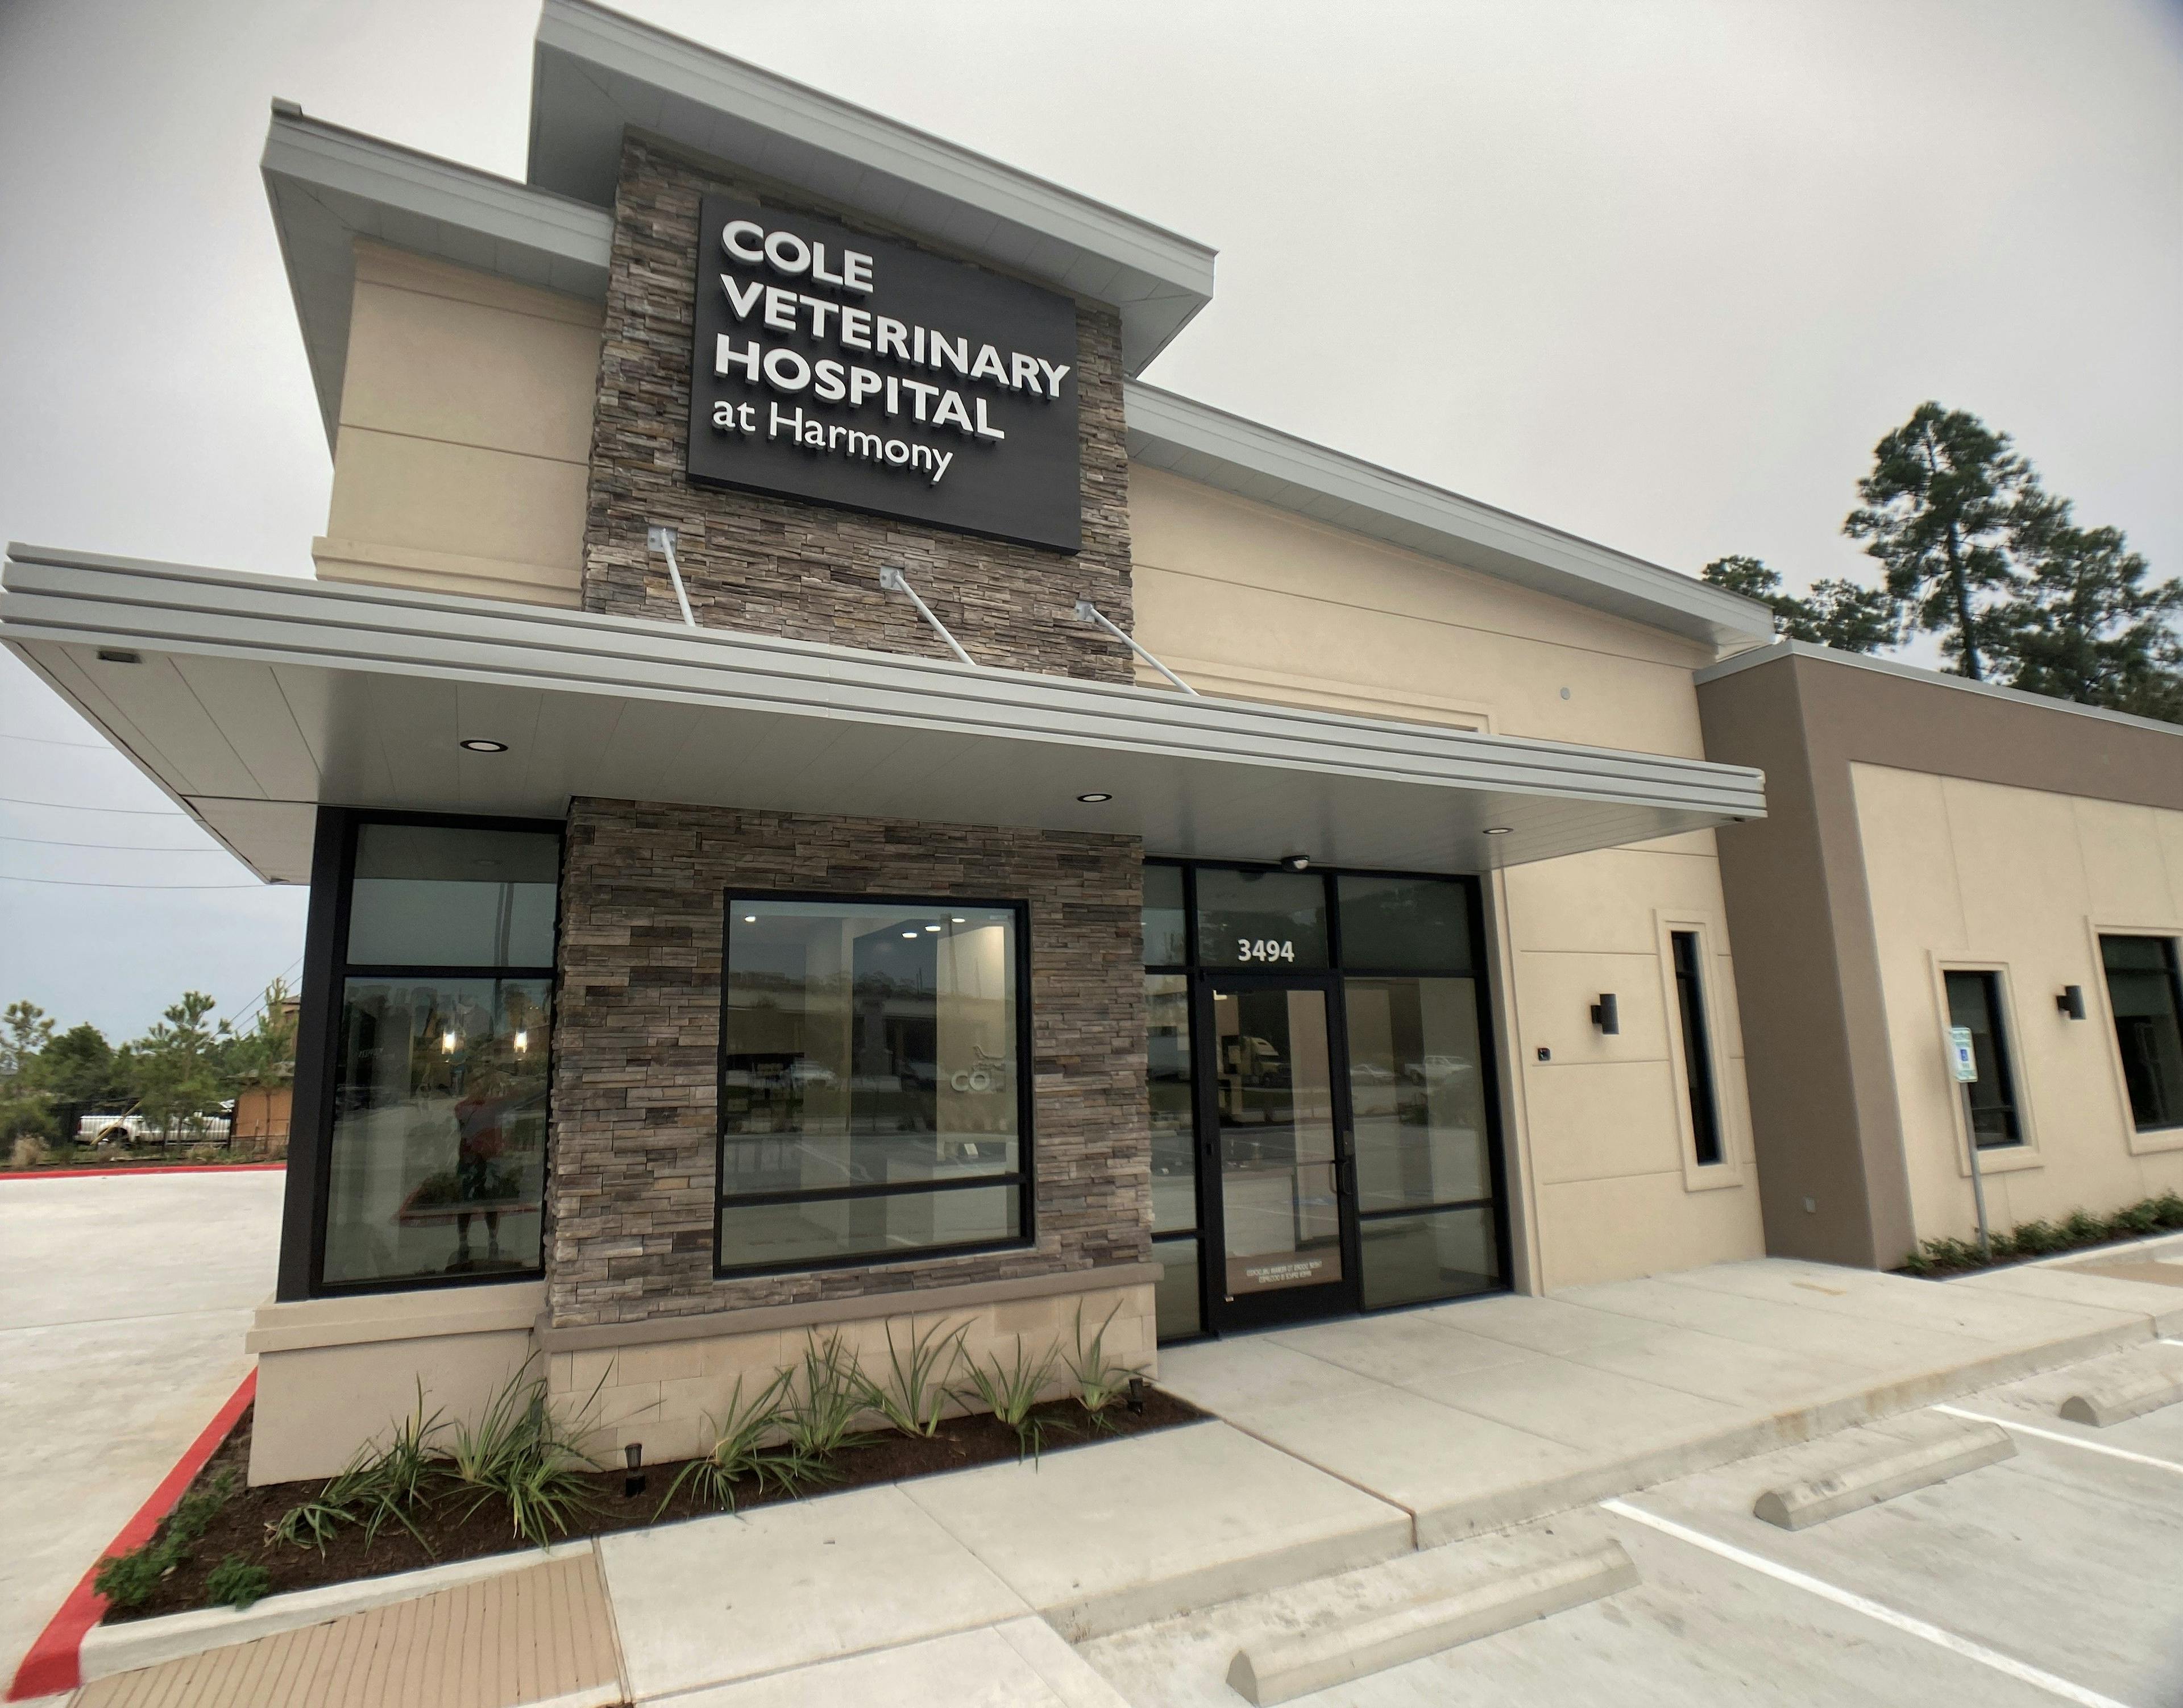 Cole Veterinary Hospital at Harmony in Spring, Texas, opened in 2020.